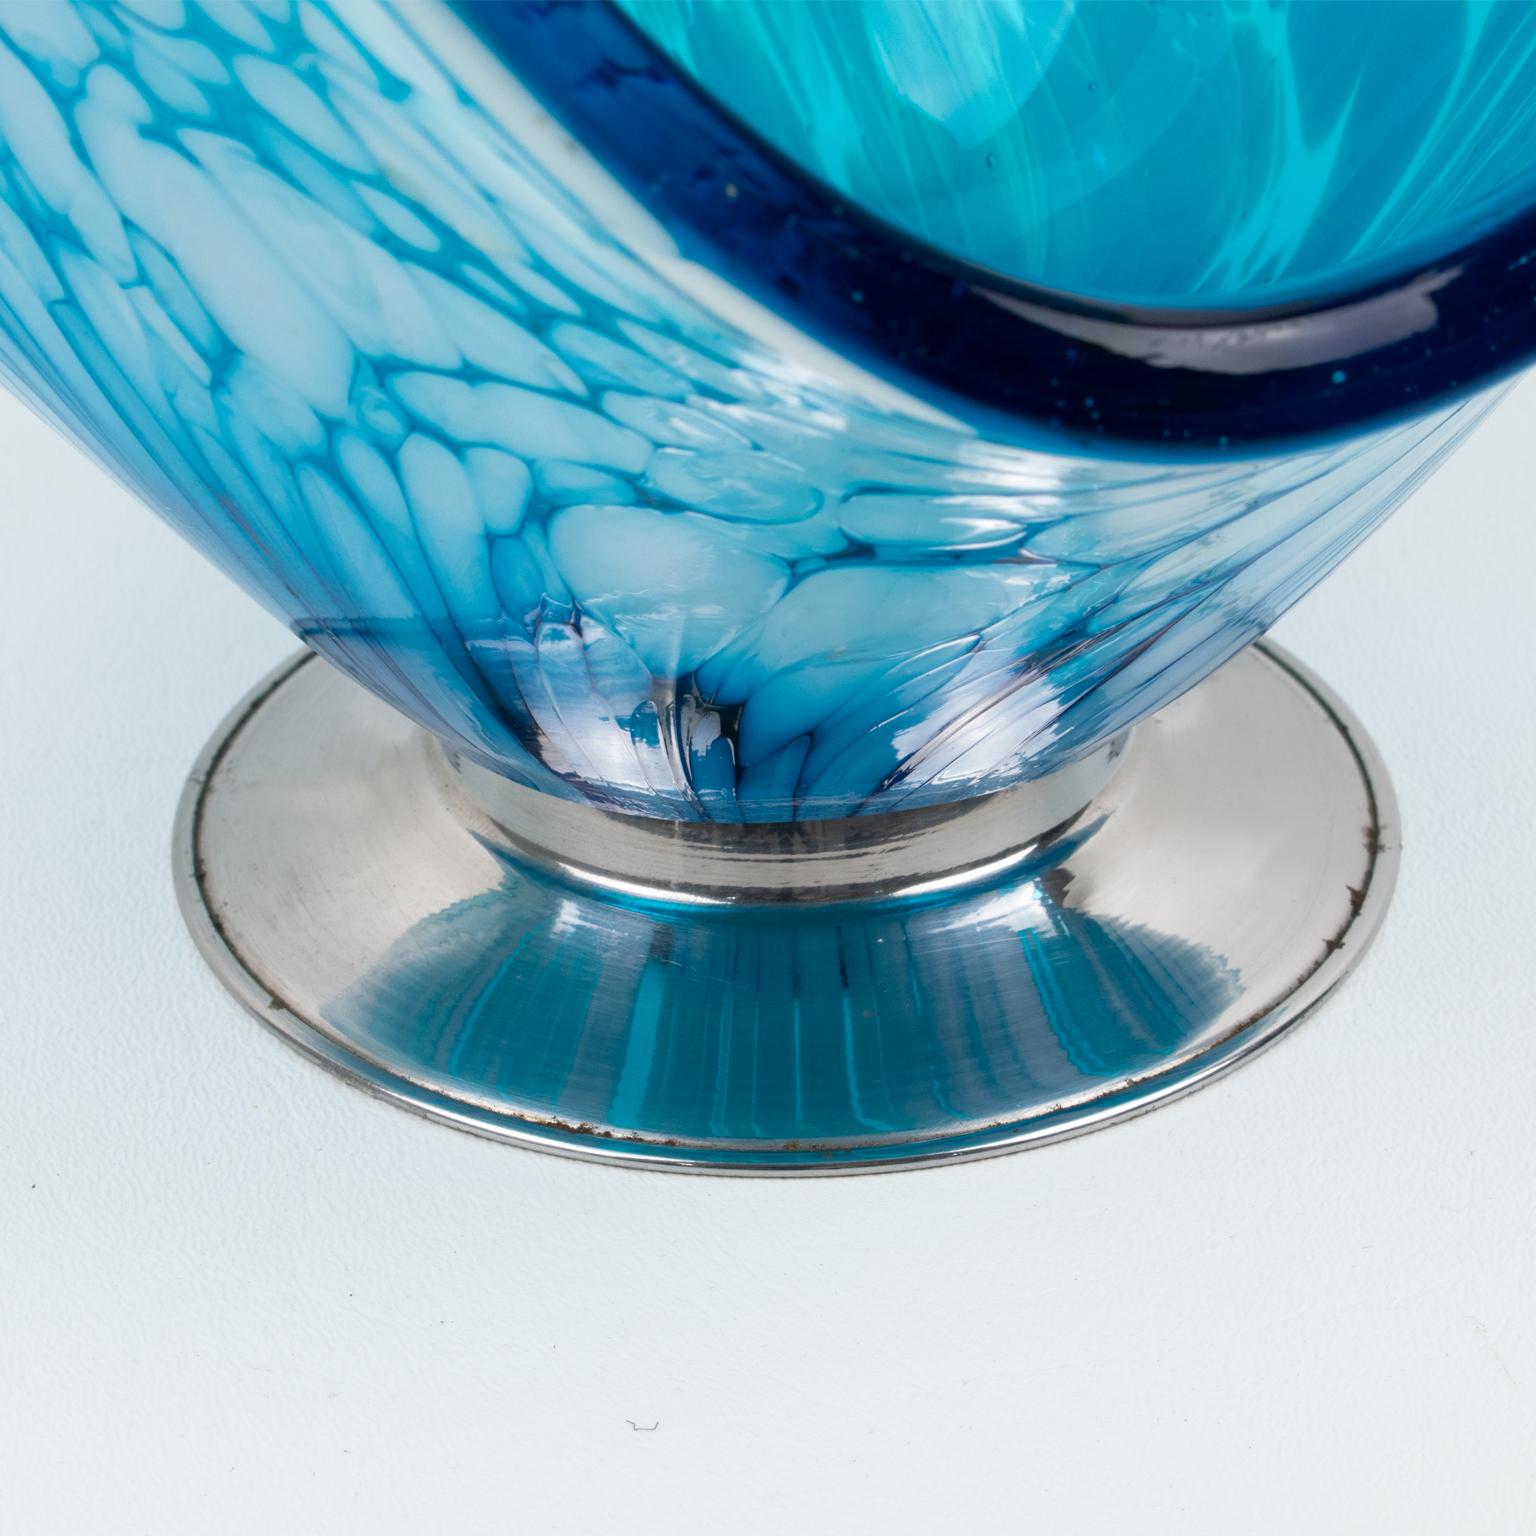 Mid-20th Century Italian Art Glass Murano Blue and White Sculptural Bowl Vase Centerpiece For Sale